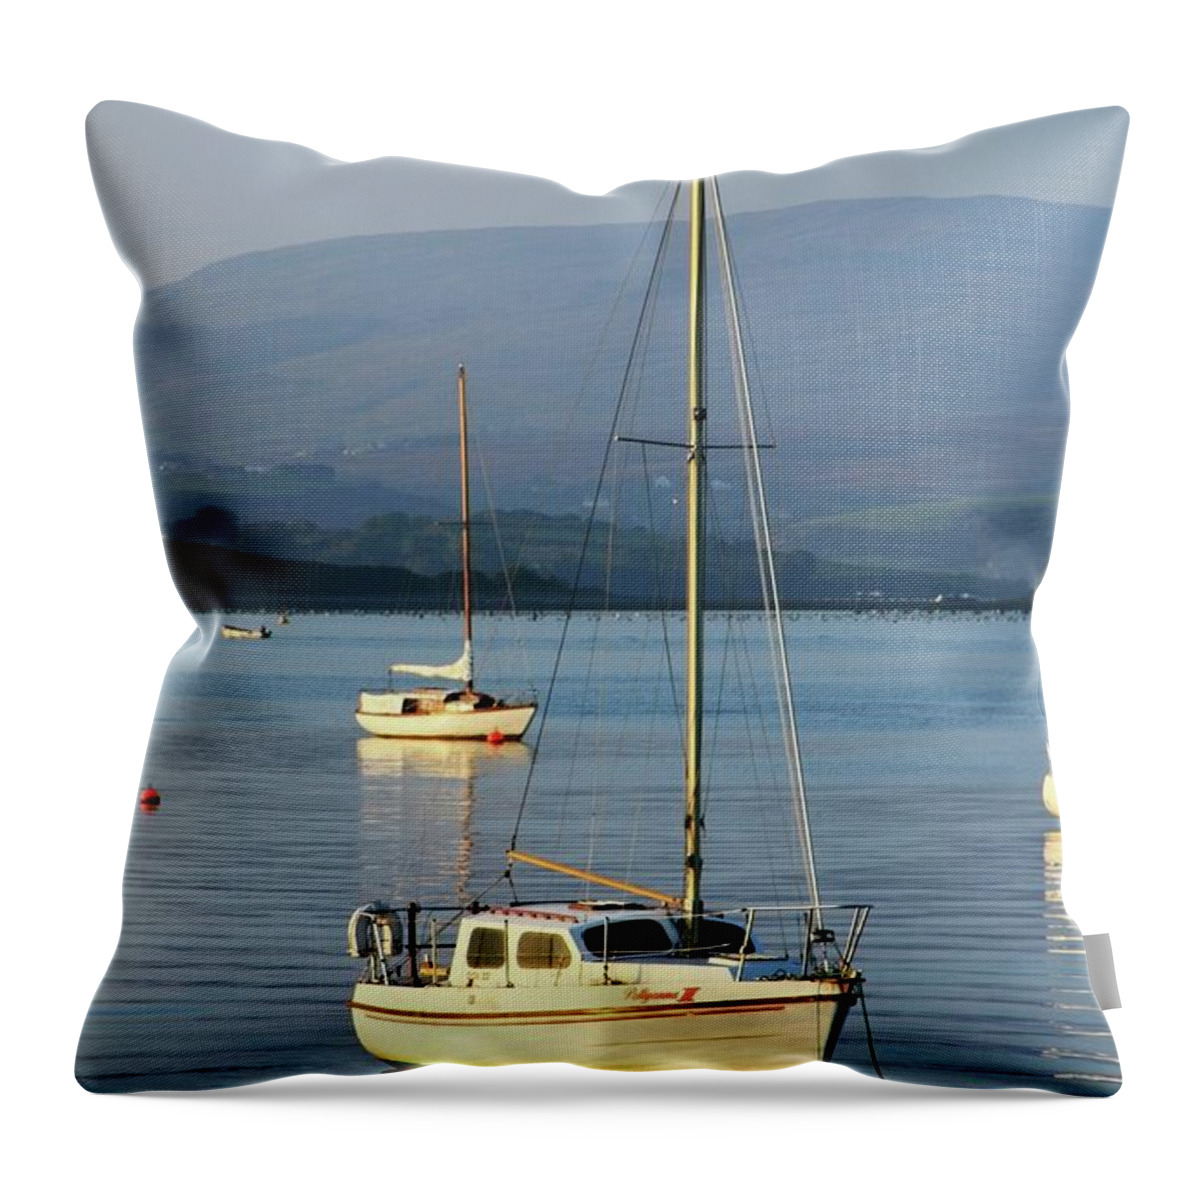 Tranquility Throw Pillow featuring the photograph Bantry Bay, County Cork, Ireland by Design Pics/peter Zoeller